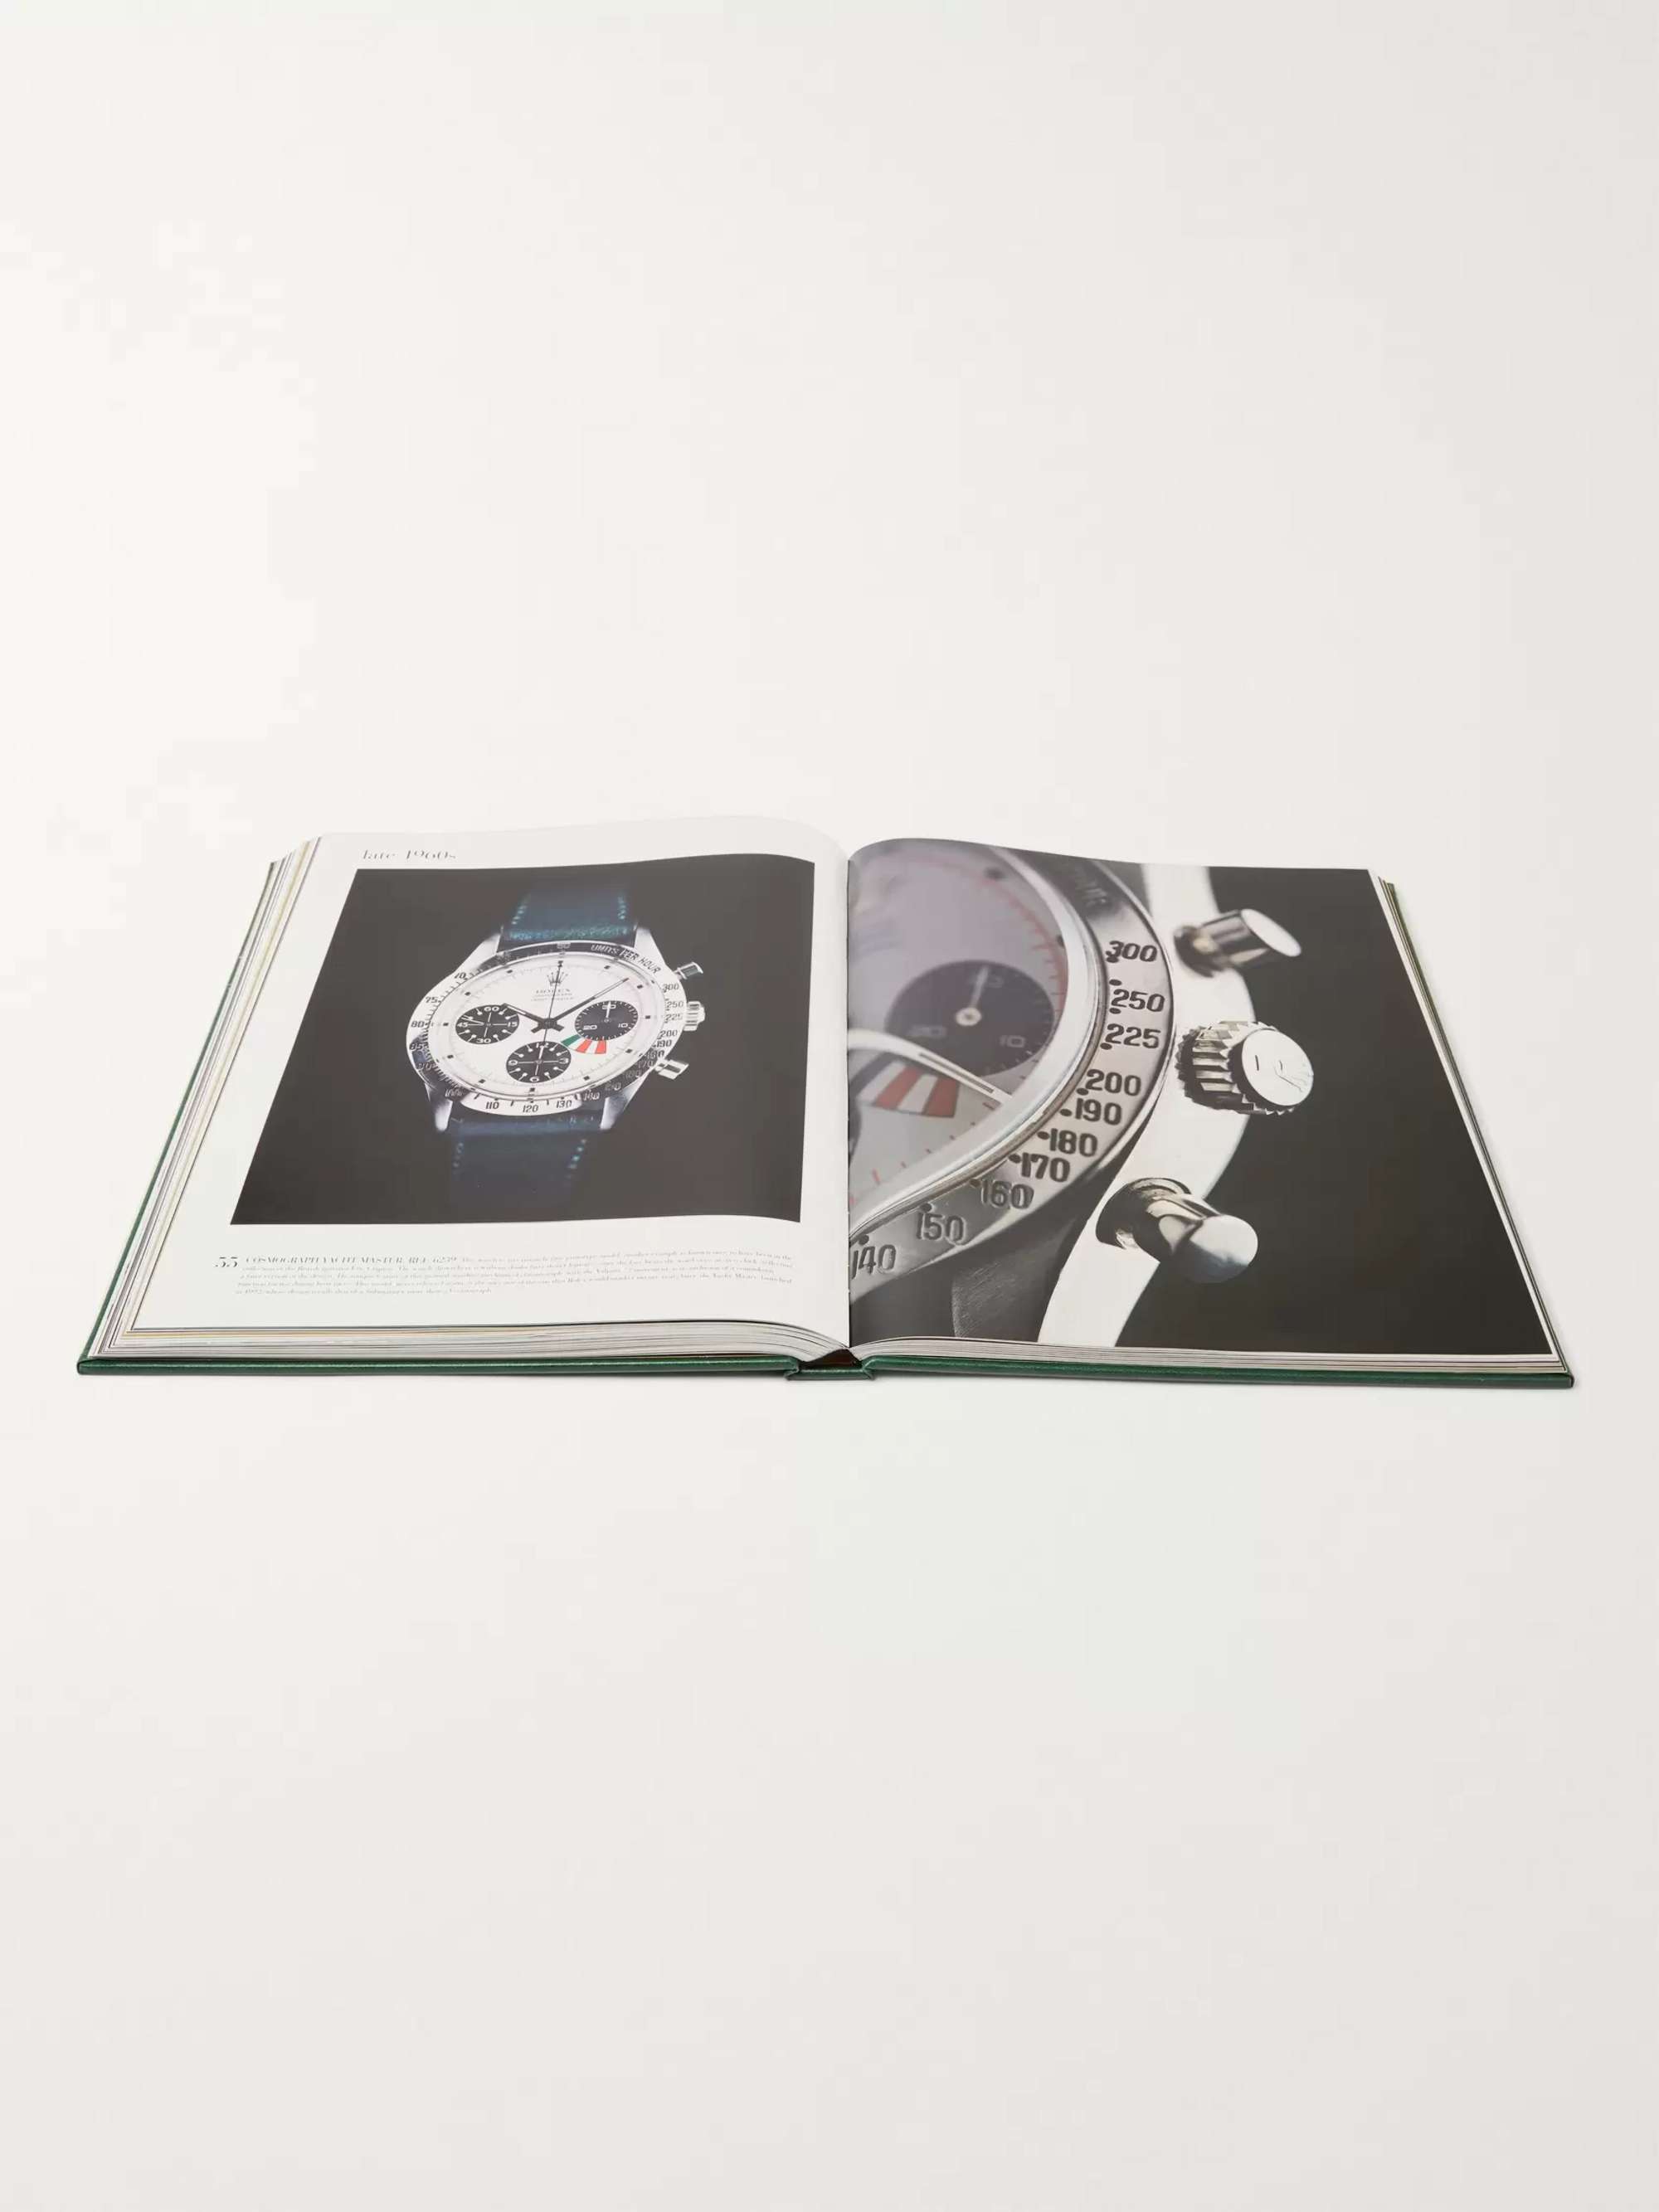 ASSOULINE Rolex: The Impossible Collection Hardcover Book